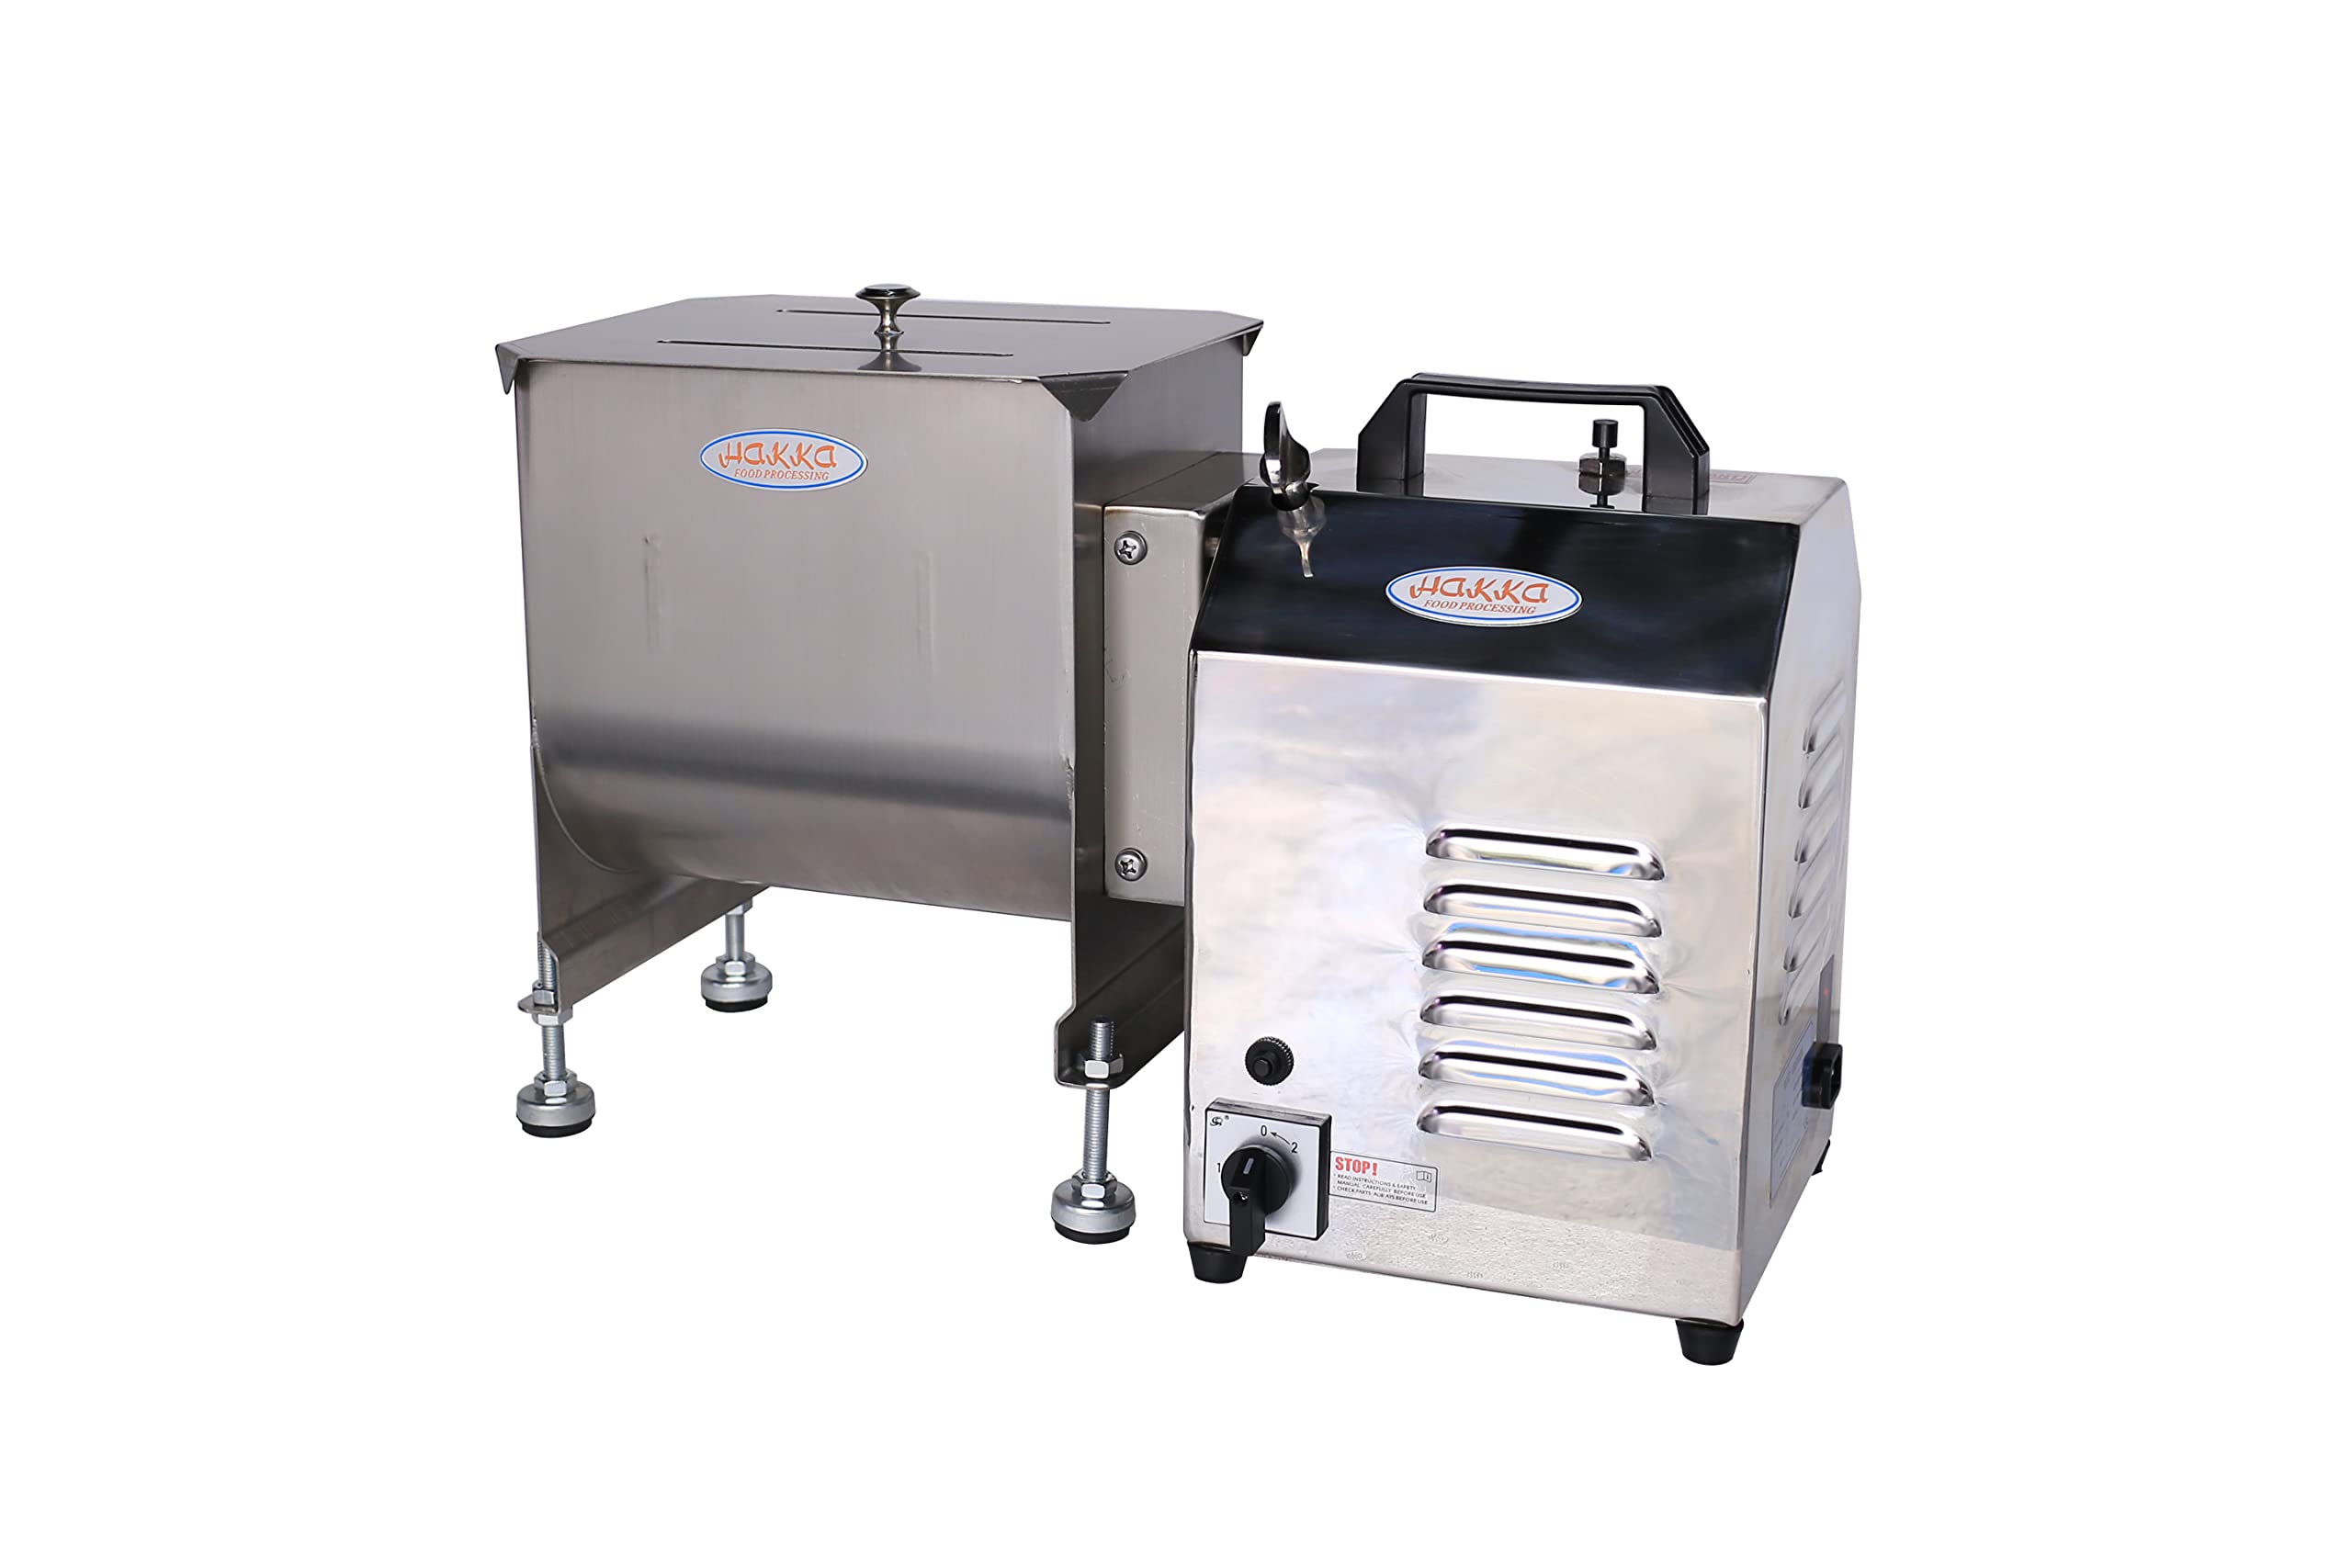 Hakka? 40-Pound capacity Tank Stainless Steel Manual Meat Mixer (Mixing  Maximum 30-Pound for Meat) 